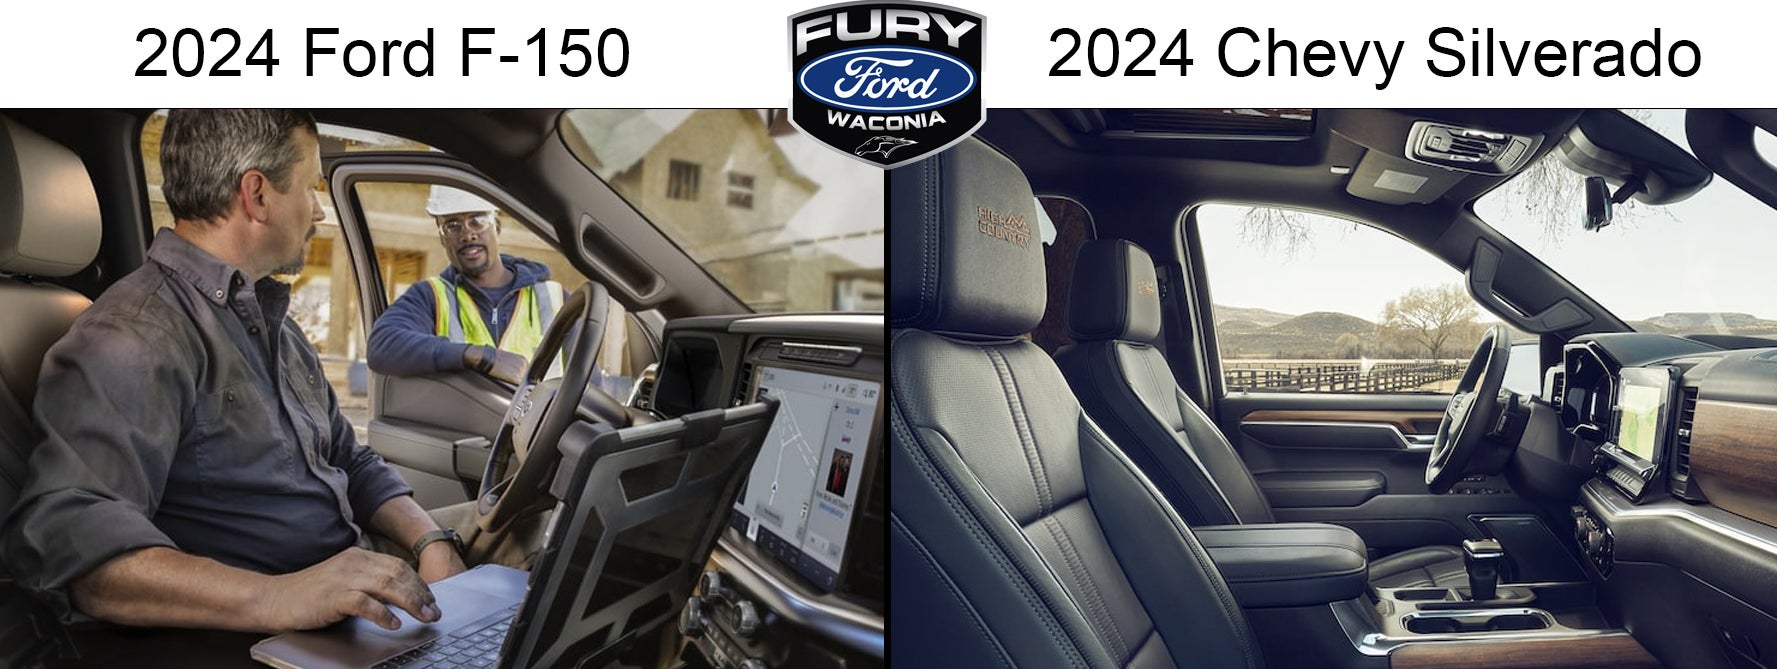 2024 Ford f-150